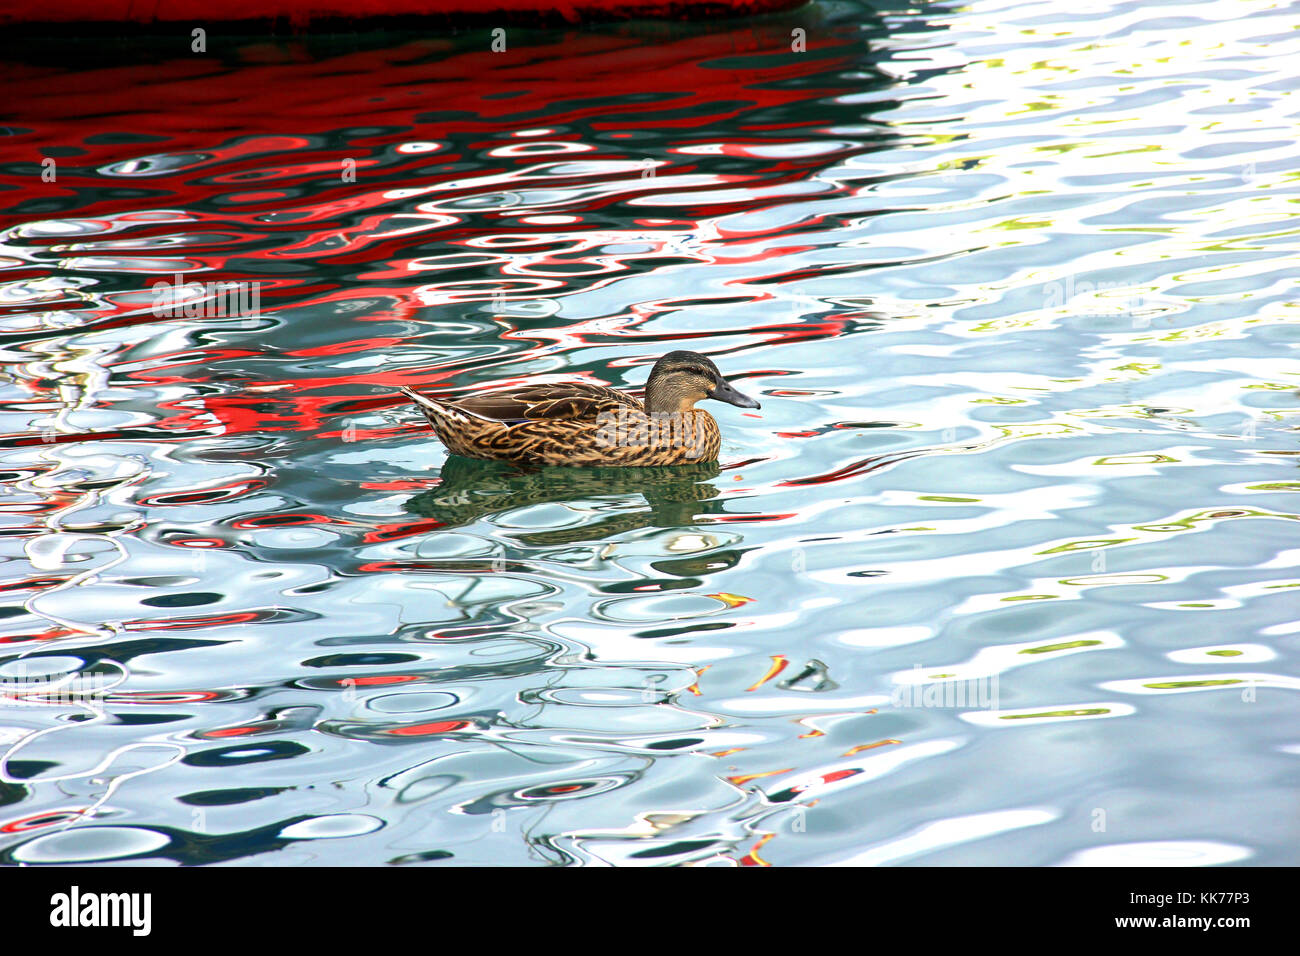 a female duck swims in the water, in which a boat is reflected Stock Photo